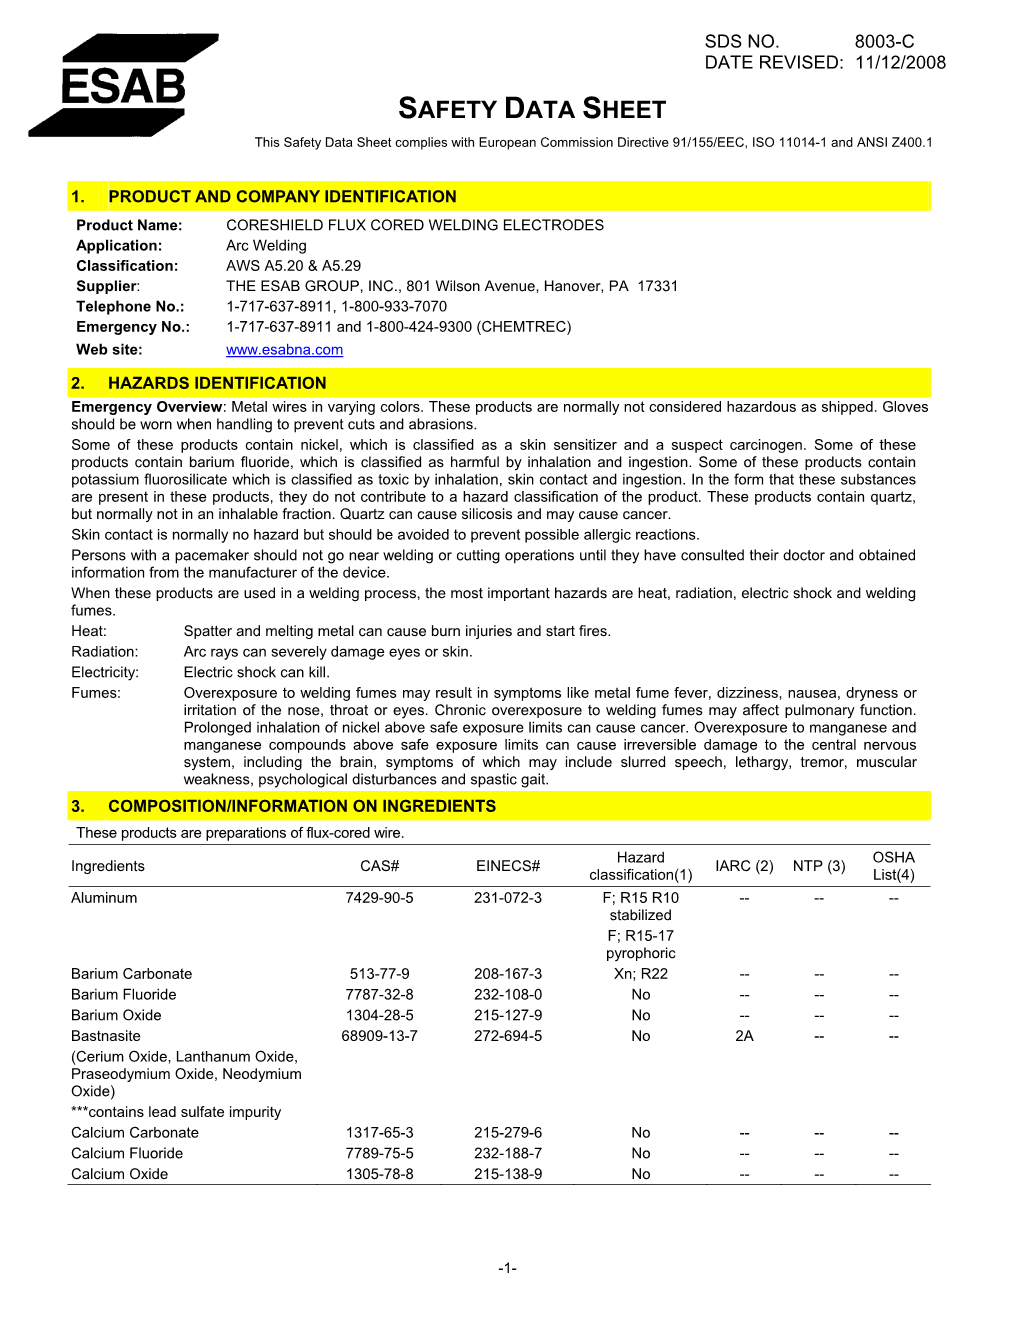 SAFETY DATA SHEET This Safety Data Sheet Complies with European Commission Directive 91/155/EEC, ISO 11014-1 and ANSI Z400.1